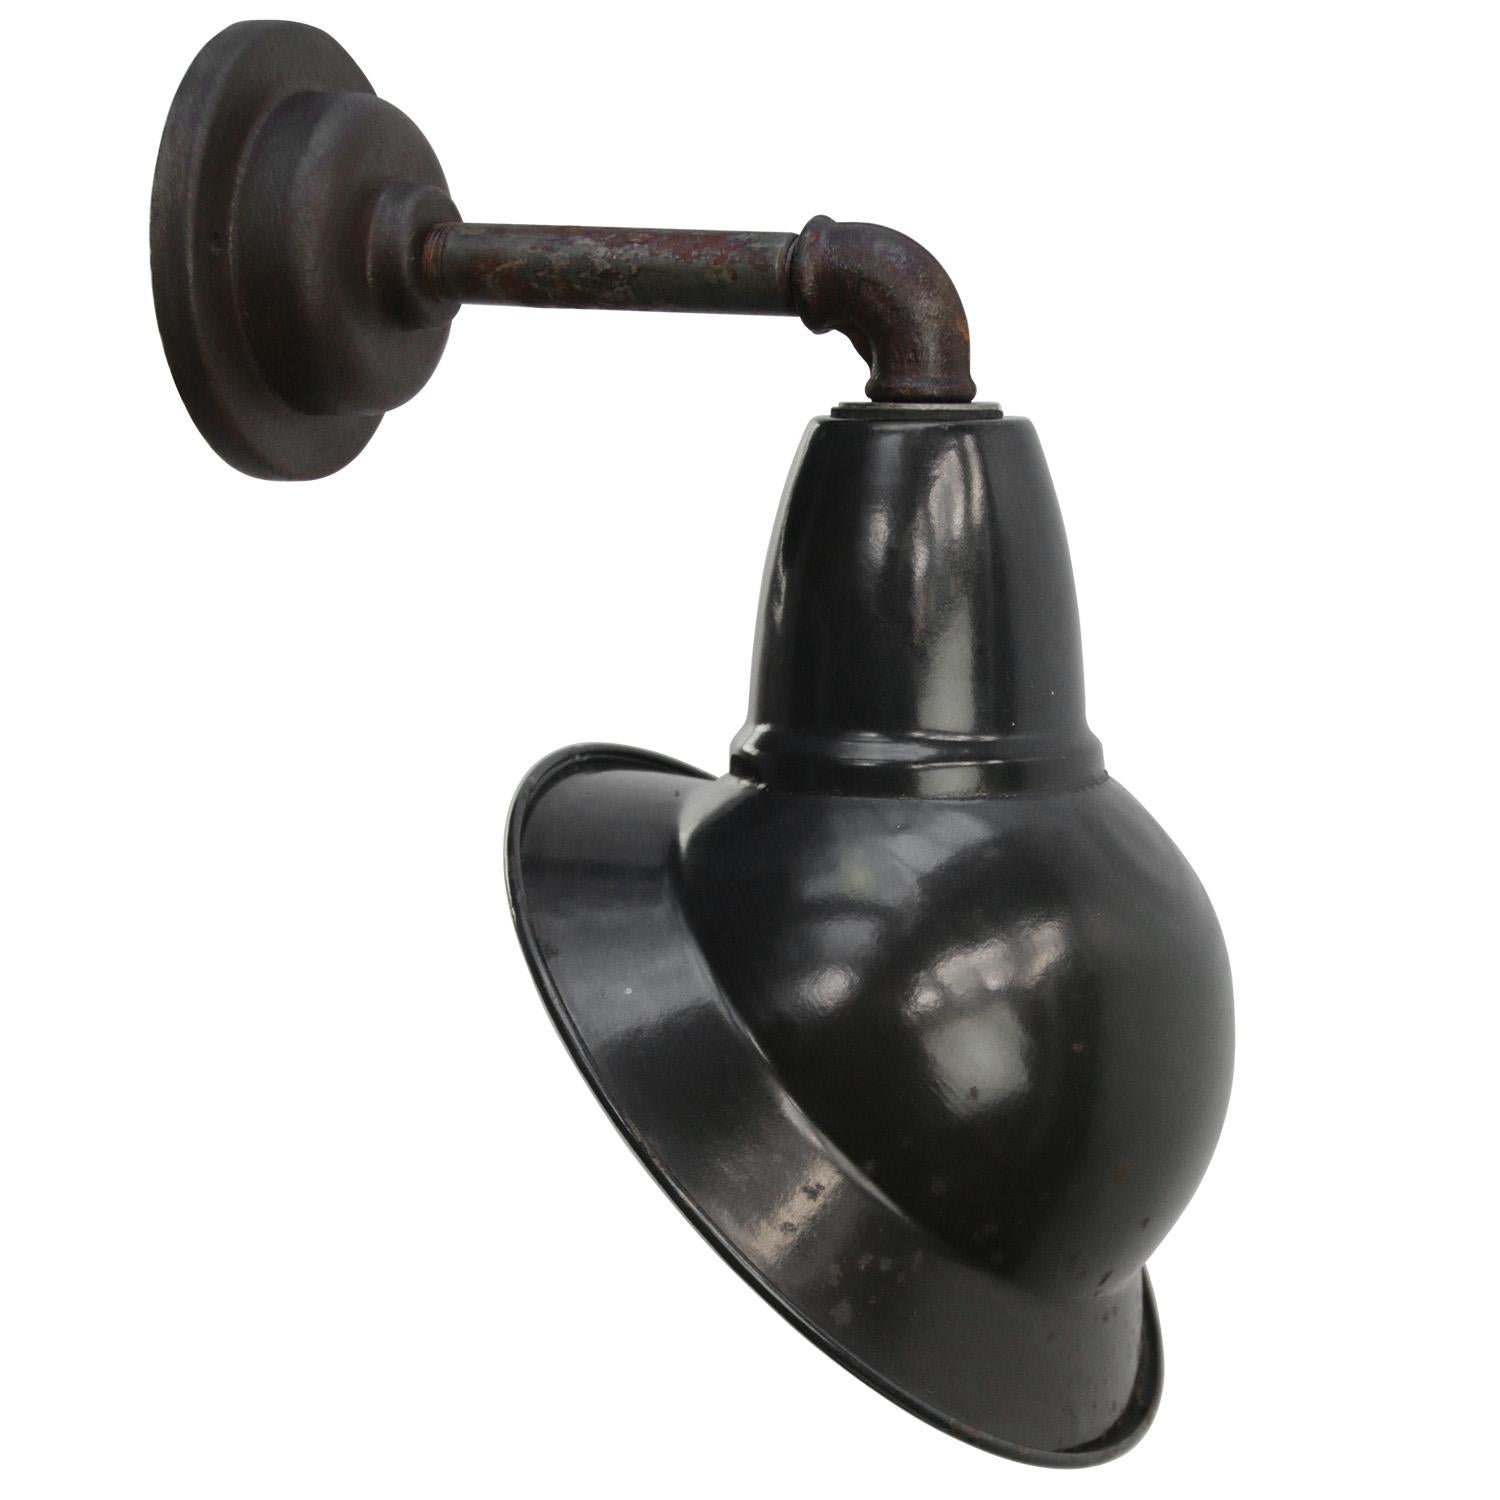 French factory wall light
black enamel, white interior

Measures: Diameter cast iron wall piece: 10 cm, 2 holes to secure

Weight: 1.30 kg / 2.9 lb

Priced per individual item. All lamps have been made suitable by international standards for